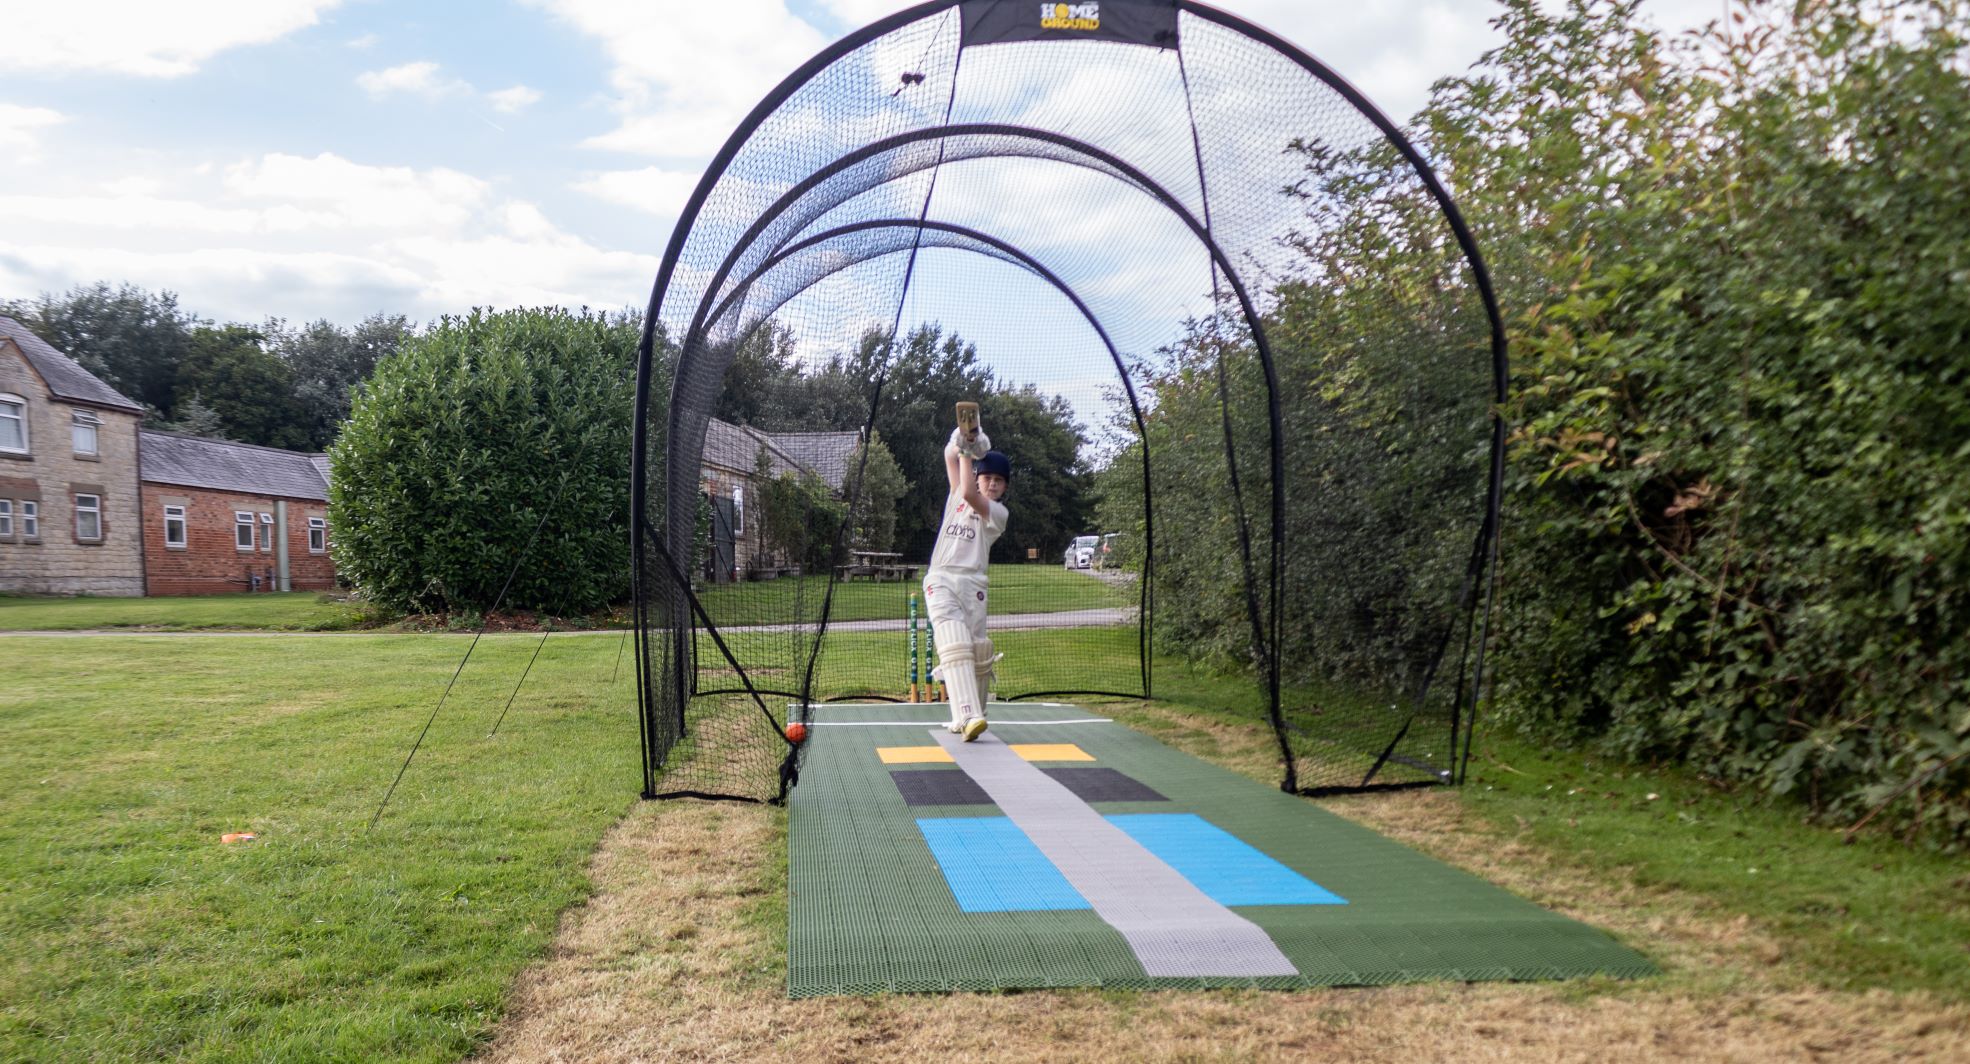 5 reasons why Flicx is the best cricket pitch mat in the USA – 2G Flicx  Pitch